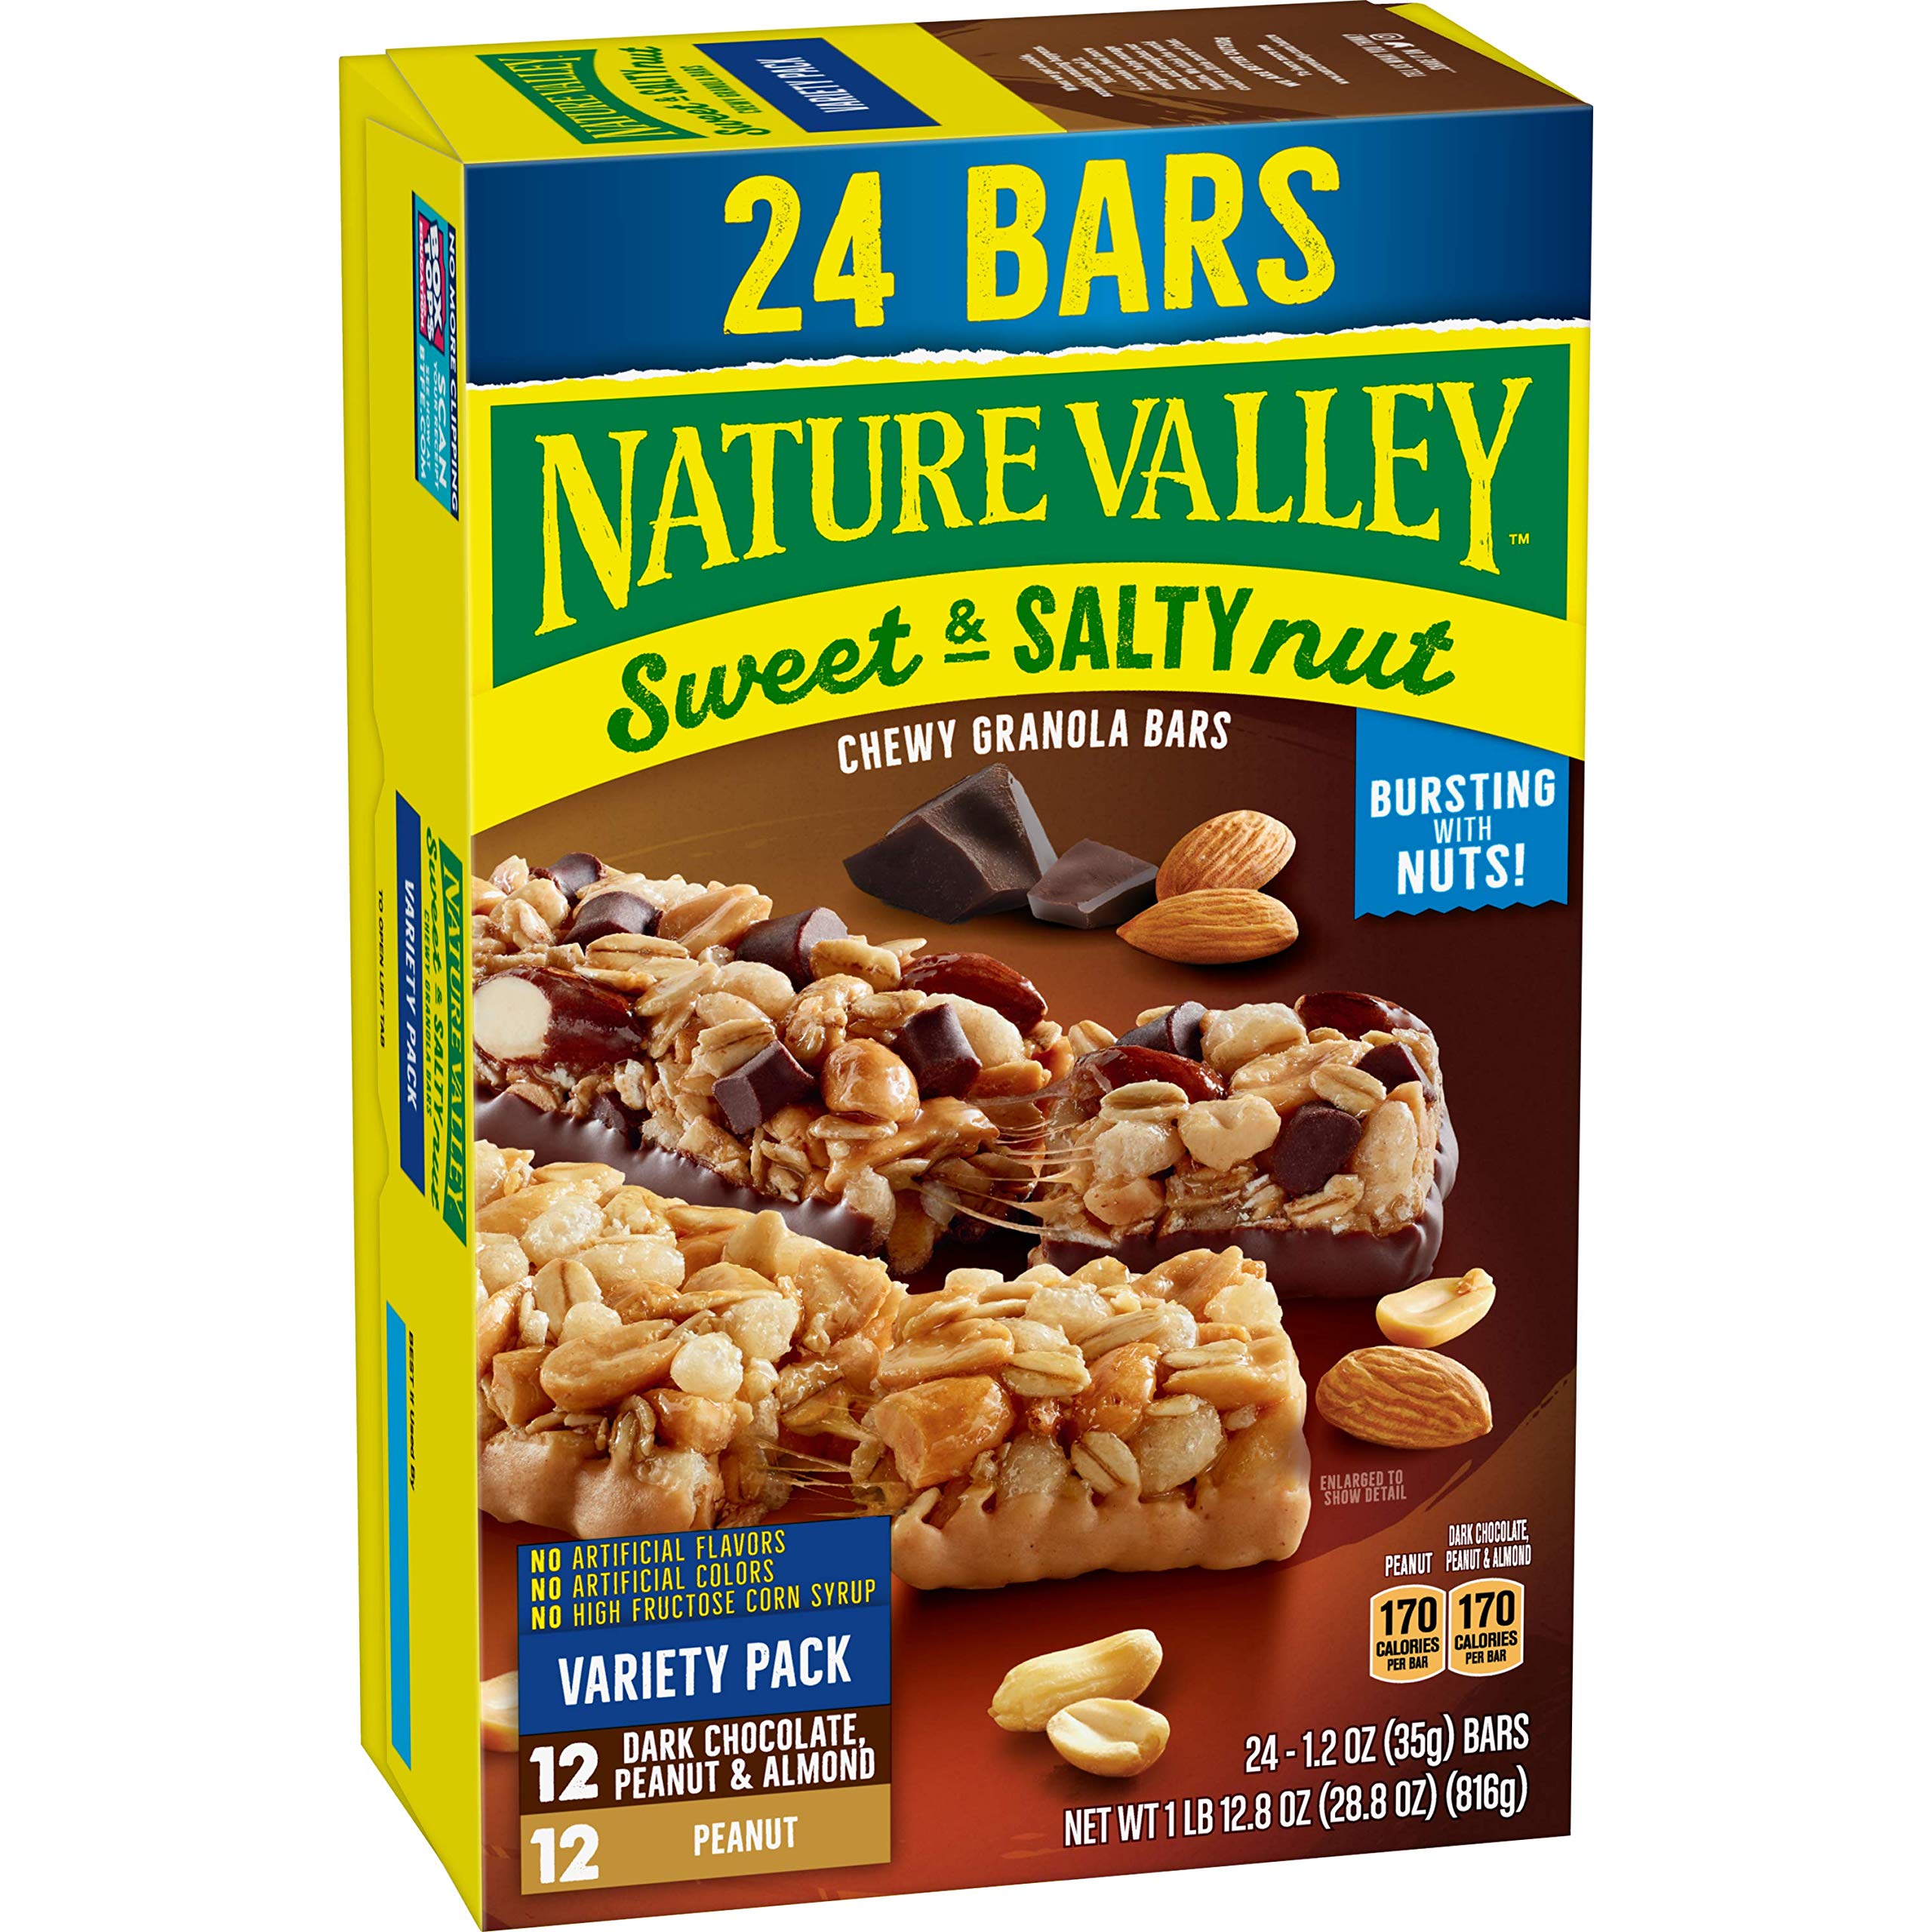 24-Count Nature Valley Granola Bars Variety Pack (Dark Chocolate Peanut & Almond or Peanut) & More $7.65 (32c Ea) + Free Shipping w/ Prime or on $35+